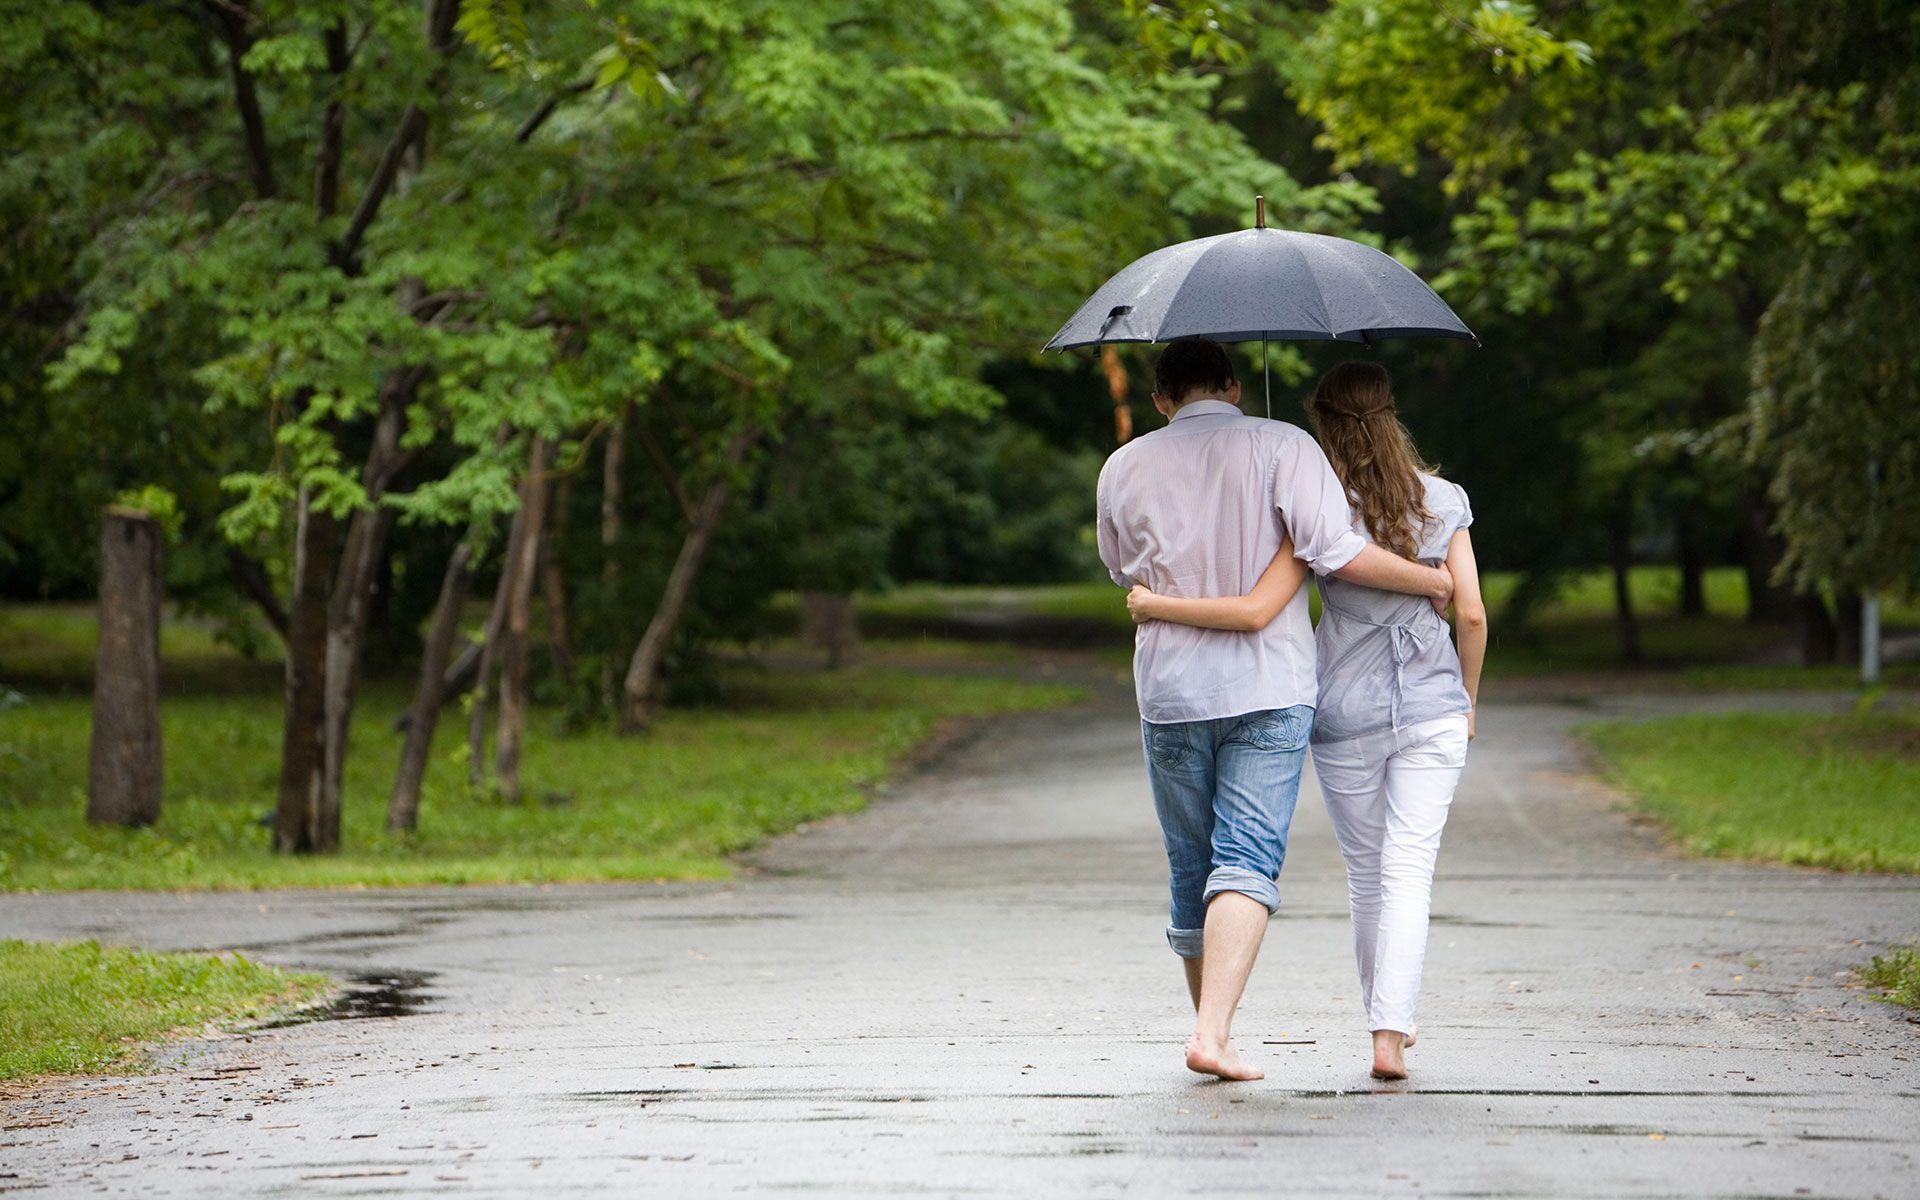 Wallpapers Of Couples In Rain Romantic Couple Rain Hd Wallpapers.